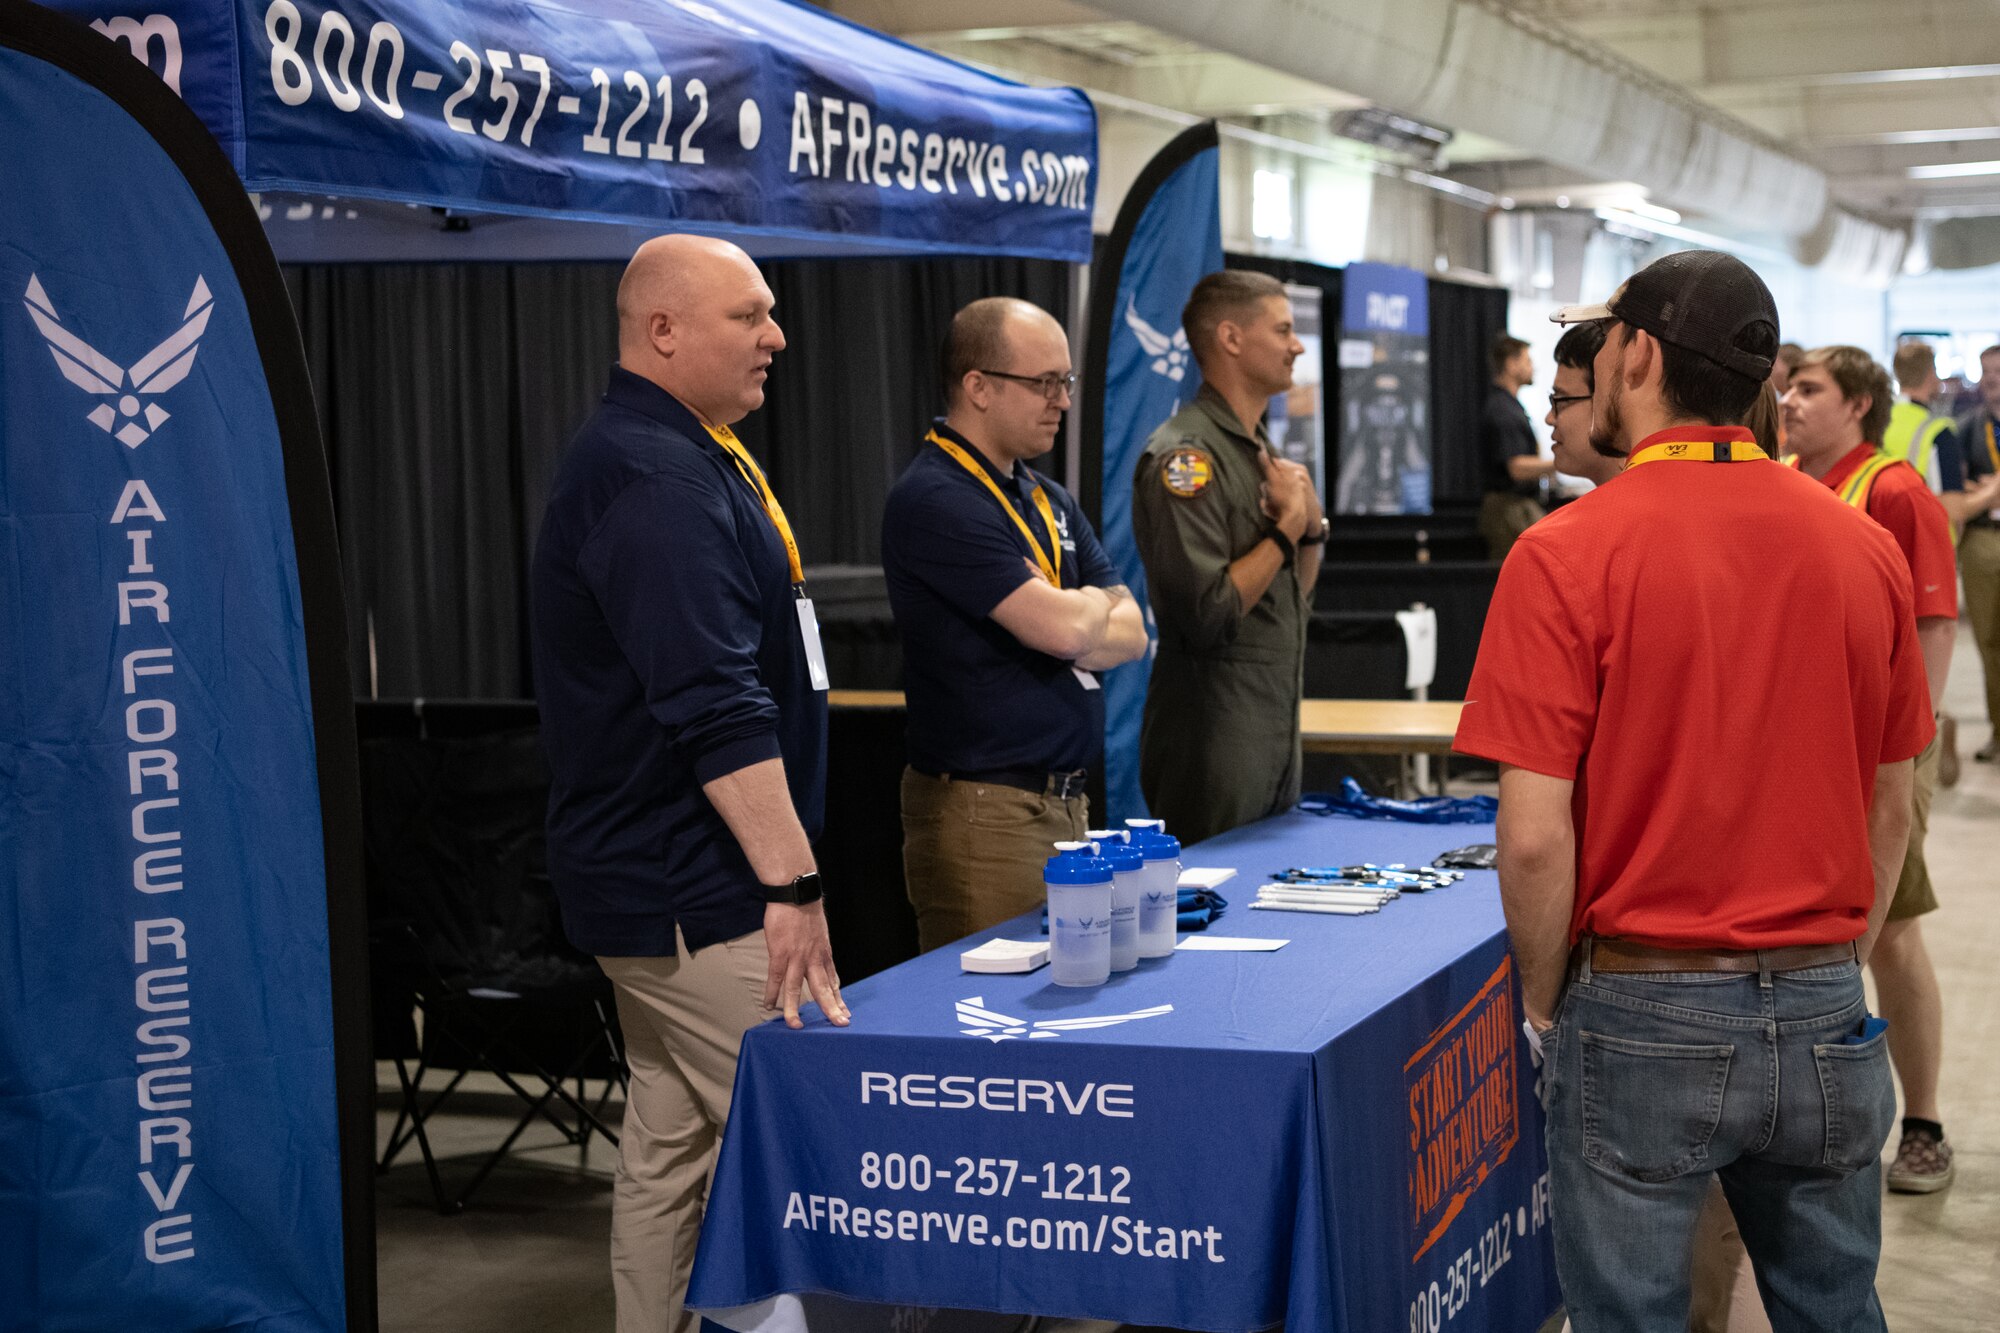 Reserve recruiters engage with collegiate aviators at a recruiting booth